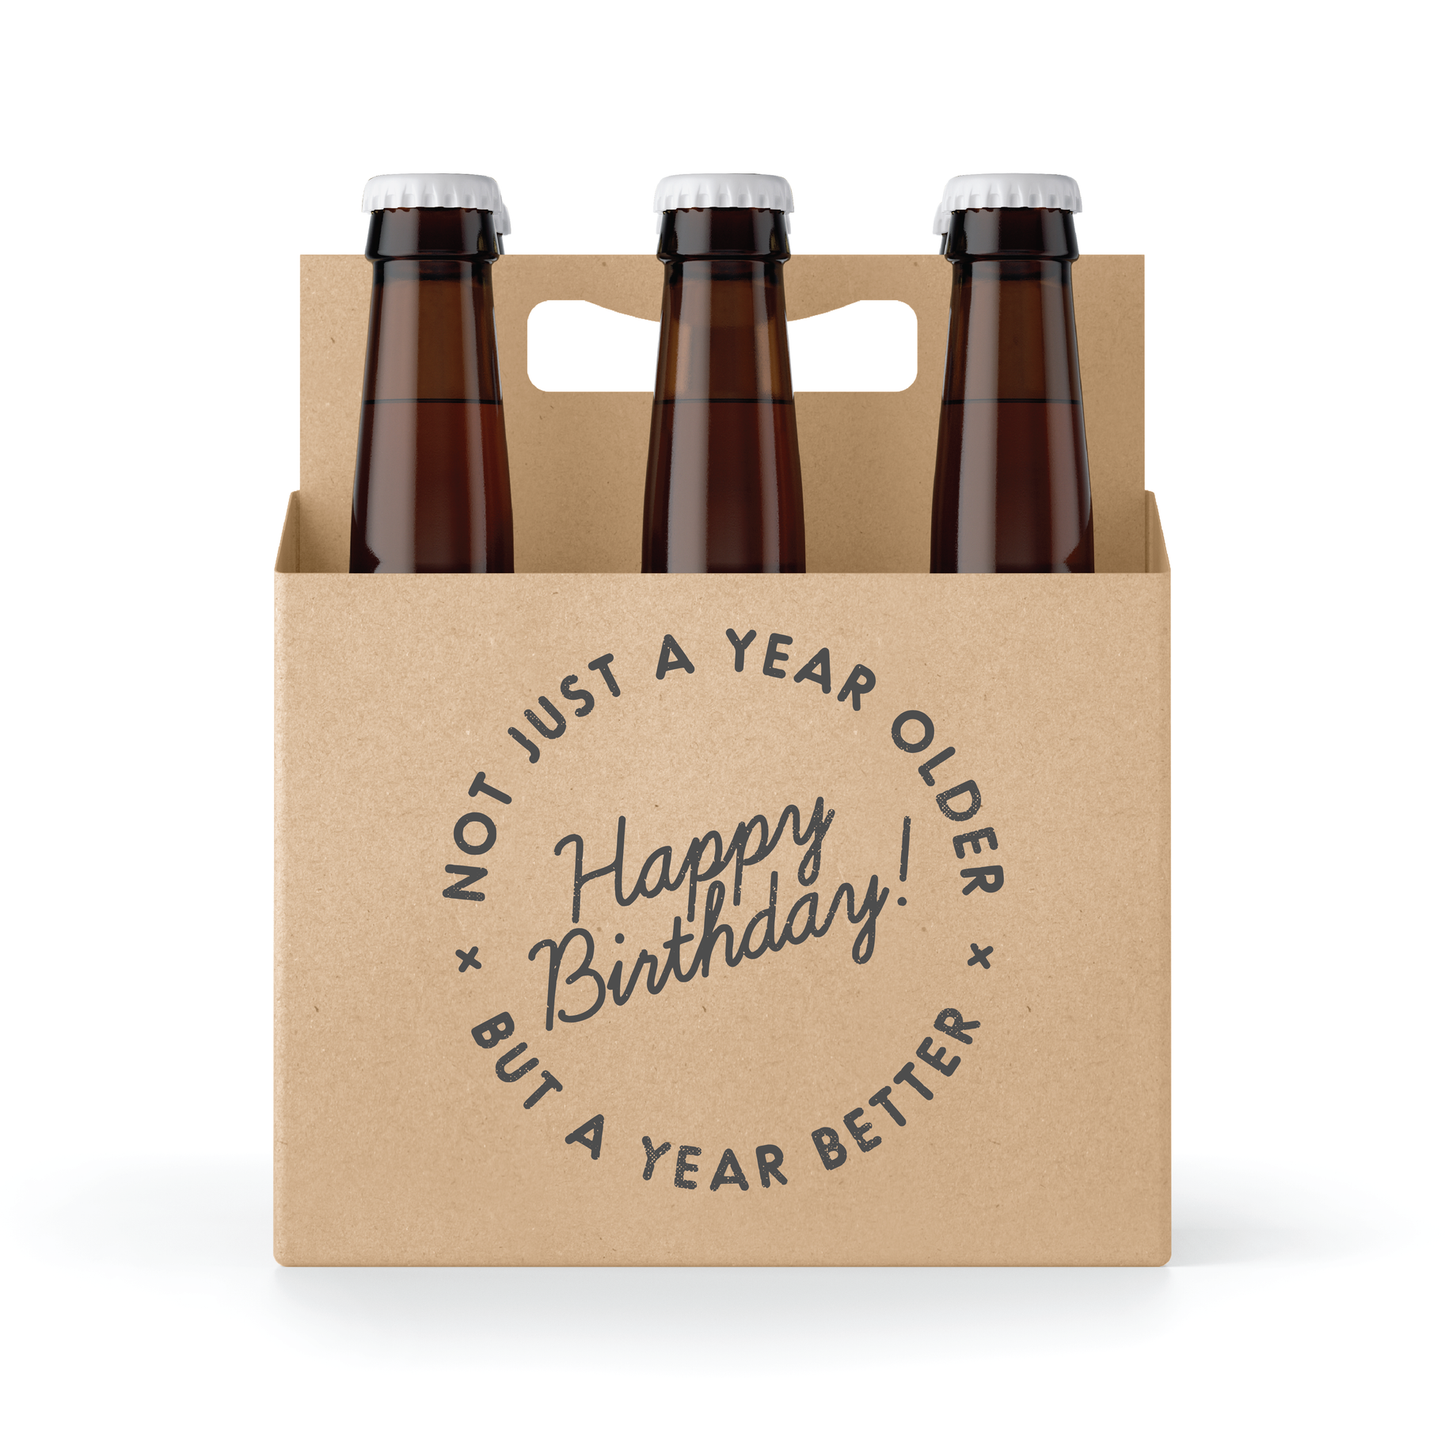 A Year Better 6-pack Holder